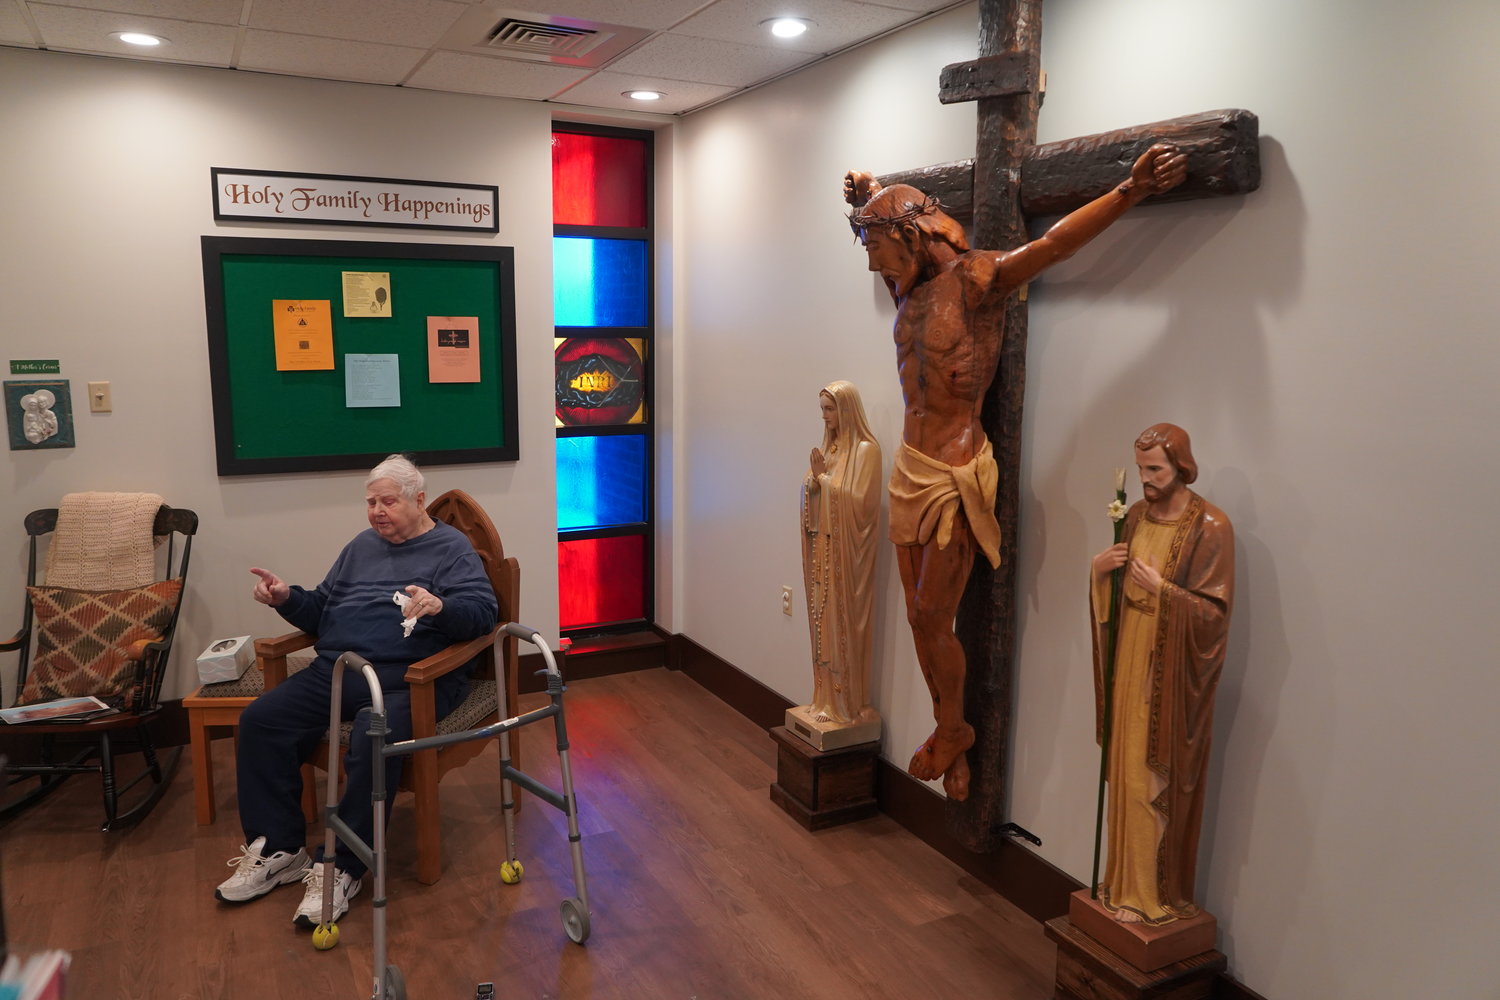 Artist Delbert Hayes tells students of Holy Family School in Hannibal about the crucifix he created about 20 years ago for Holy Family Church. They met with him March 10 in what is not the gathering area for the church.